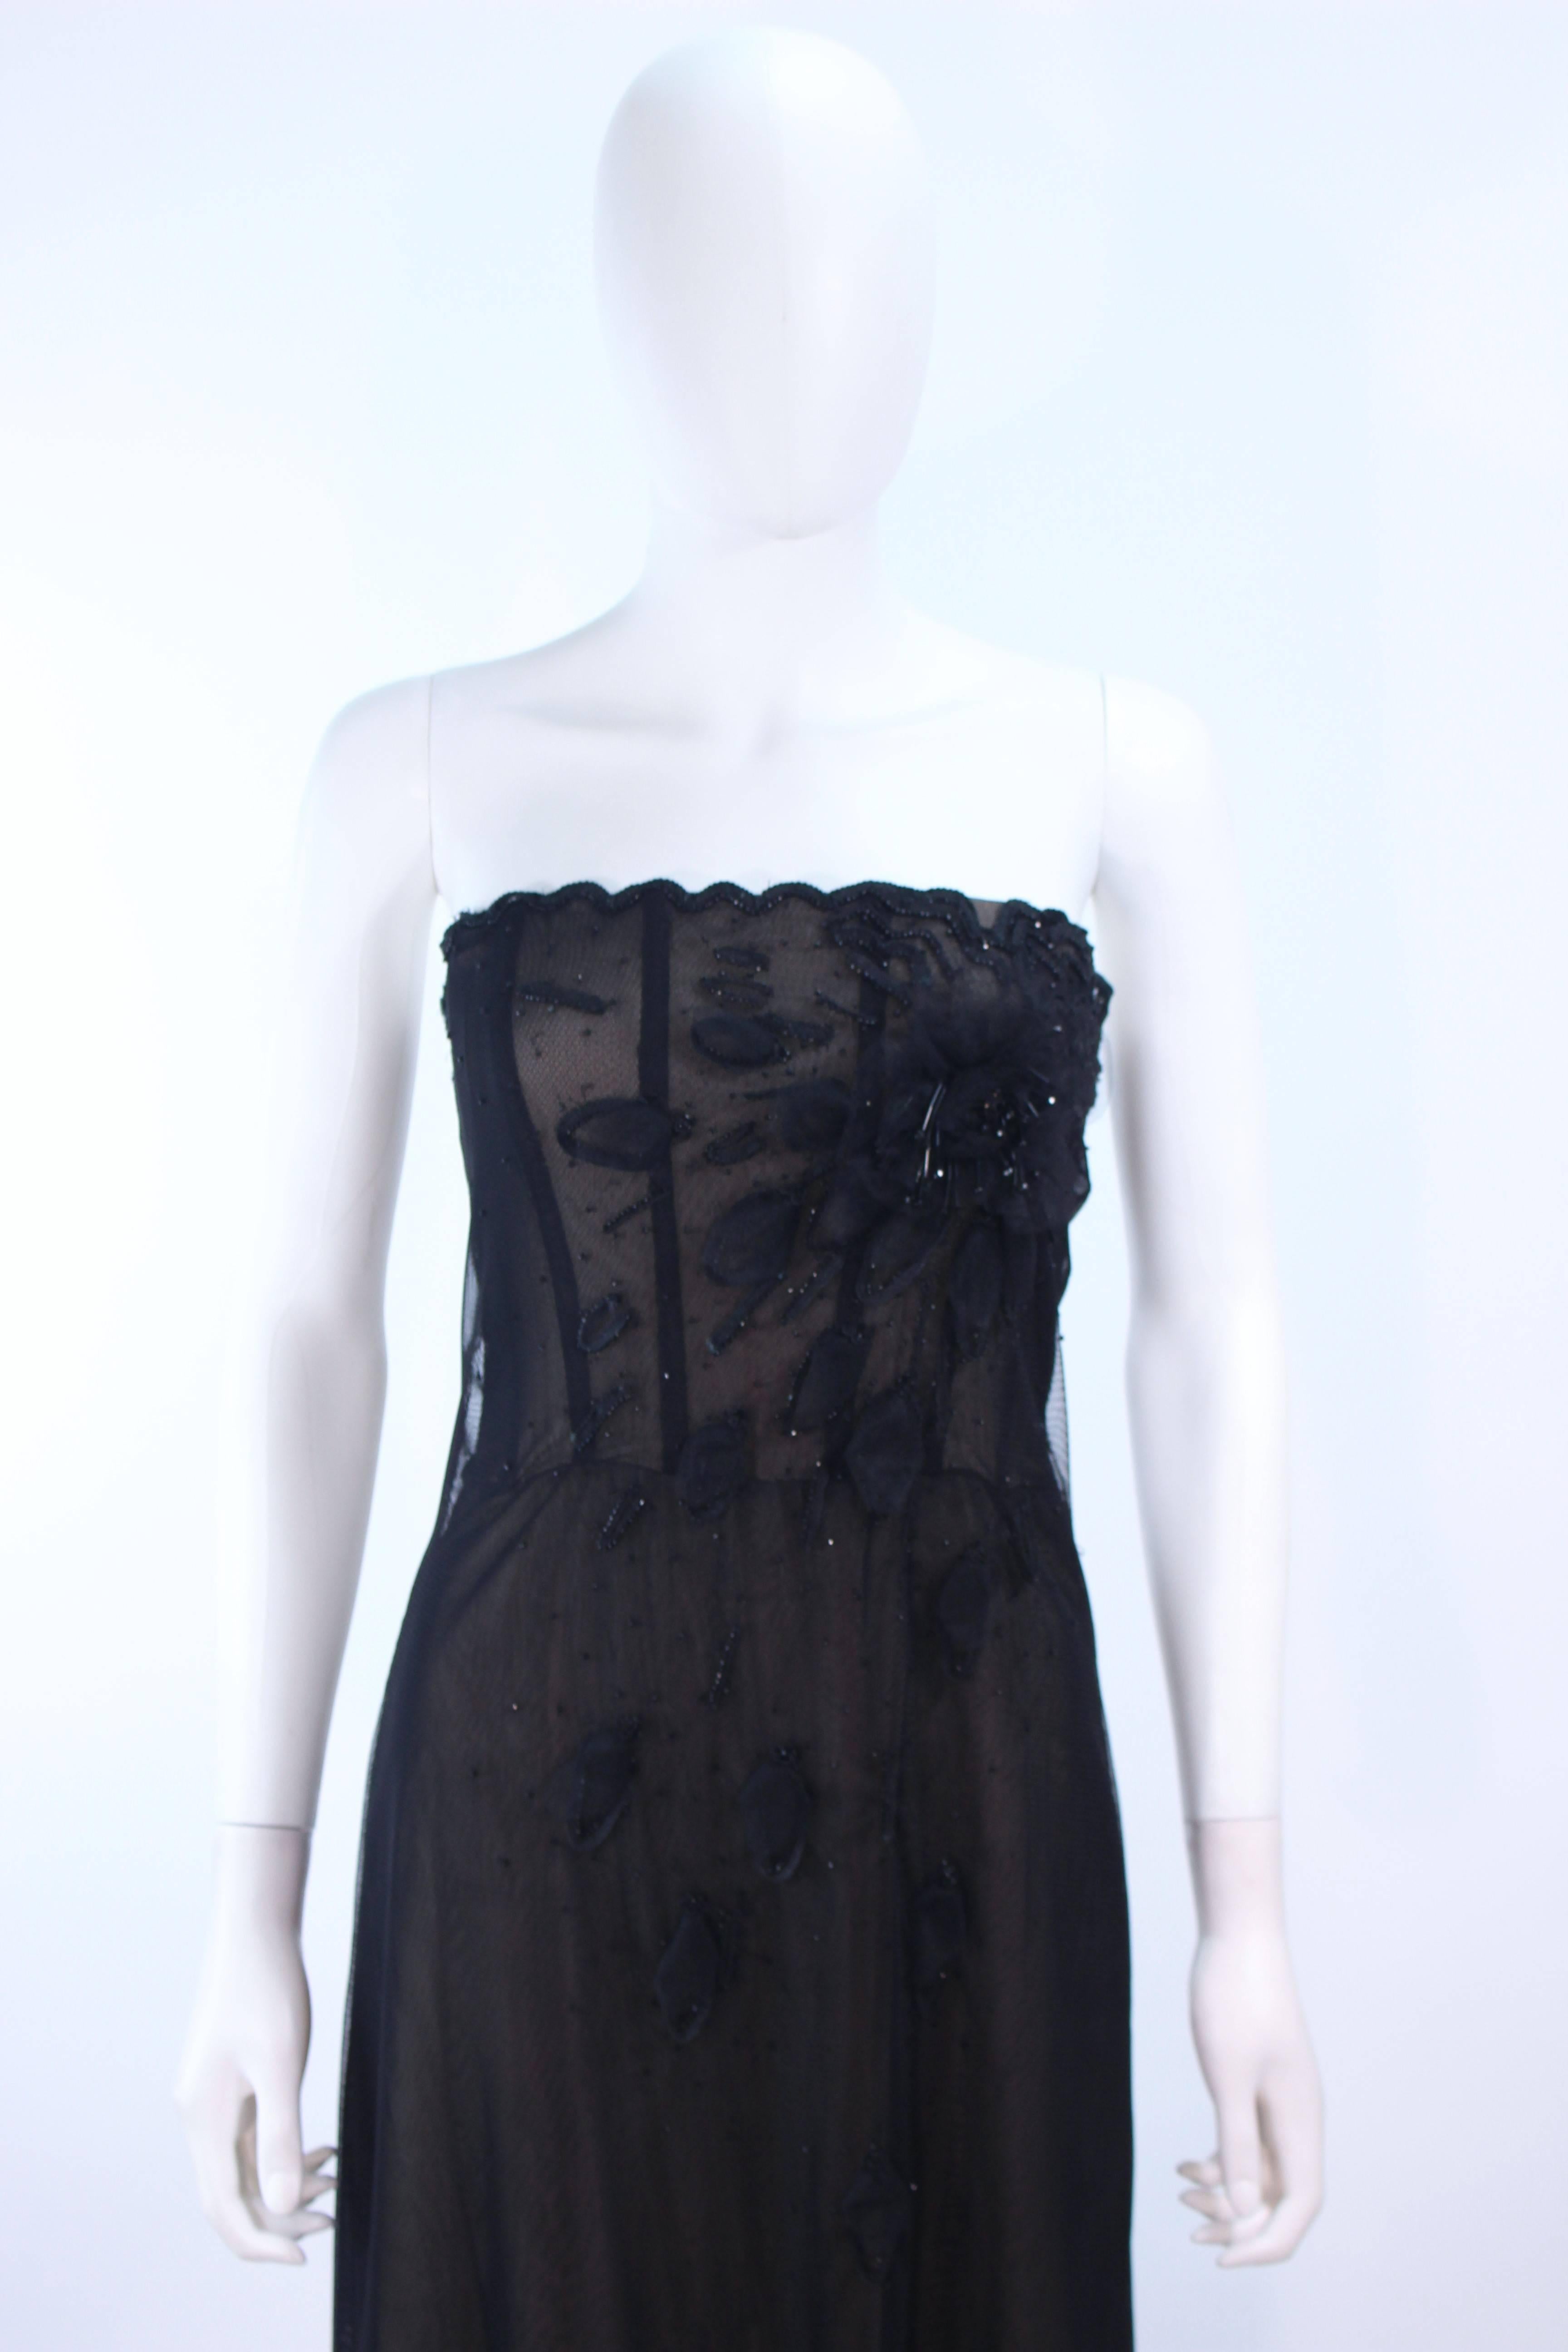 This gown is composed of a beaded black mesh with a floral pattern, and nude lining detail. Features interior boning. There is a center back zipper closure. In great vintage condition.

**Please cross-reference measurements for personal accuracy.